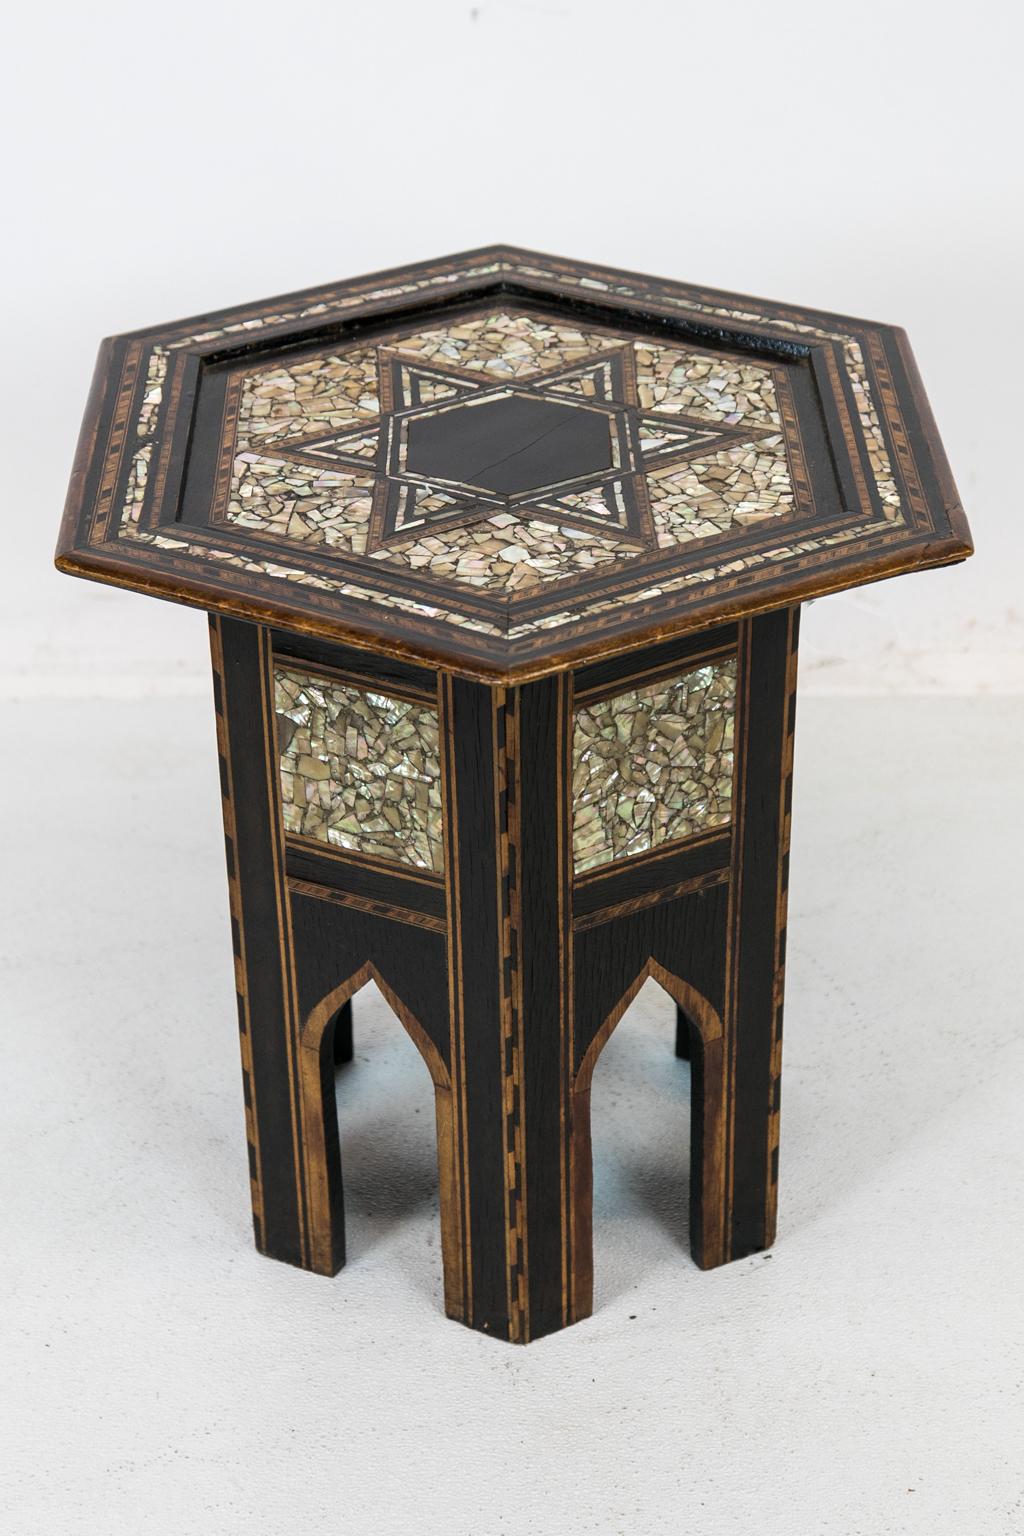 Late 19th Century Hexagonal Inlaid Moroccan Table For Sale